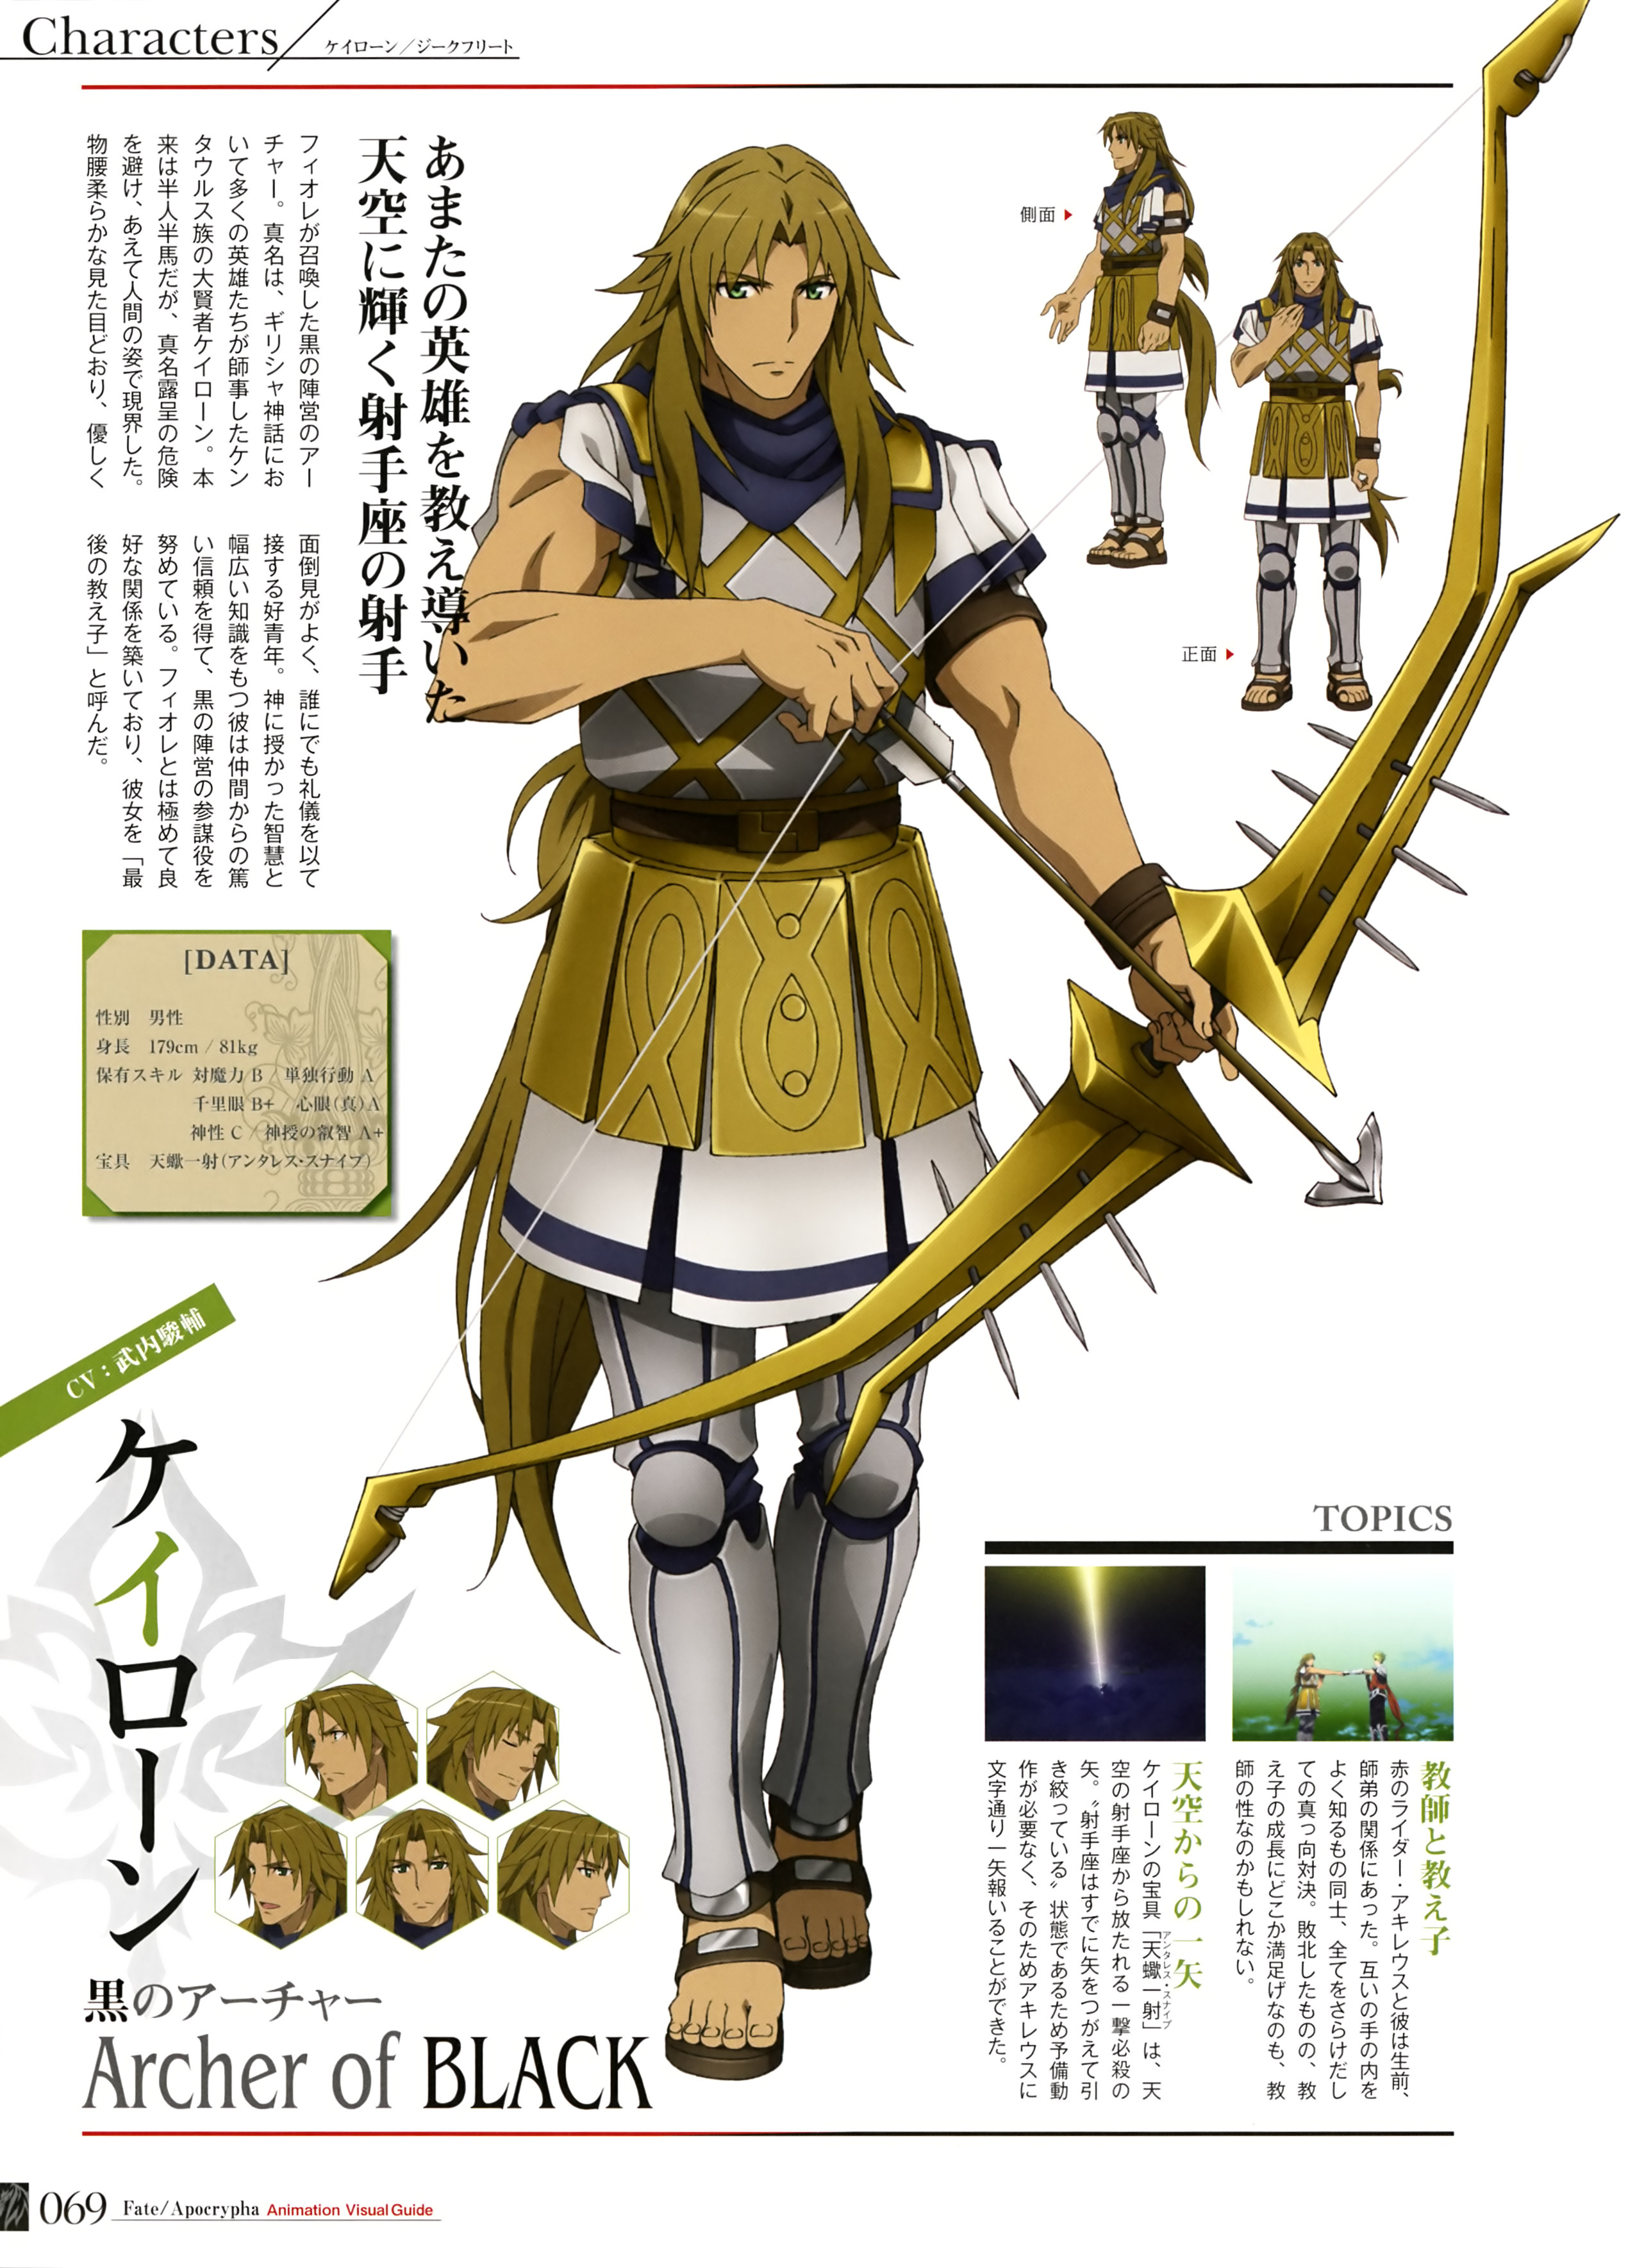 Fate Apocrypha Fate Stay Night Character Design Expression Male Profile Page Weapon 5540 Yande Re